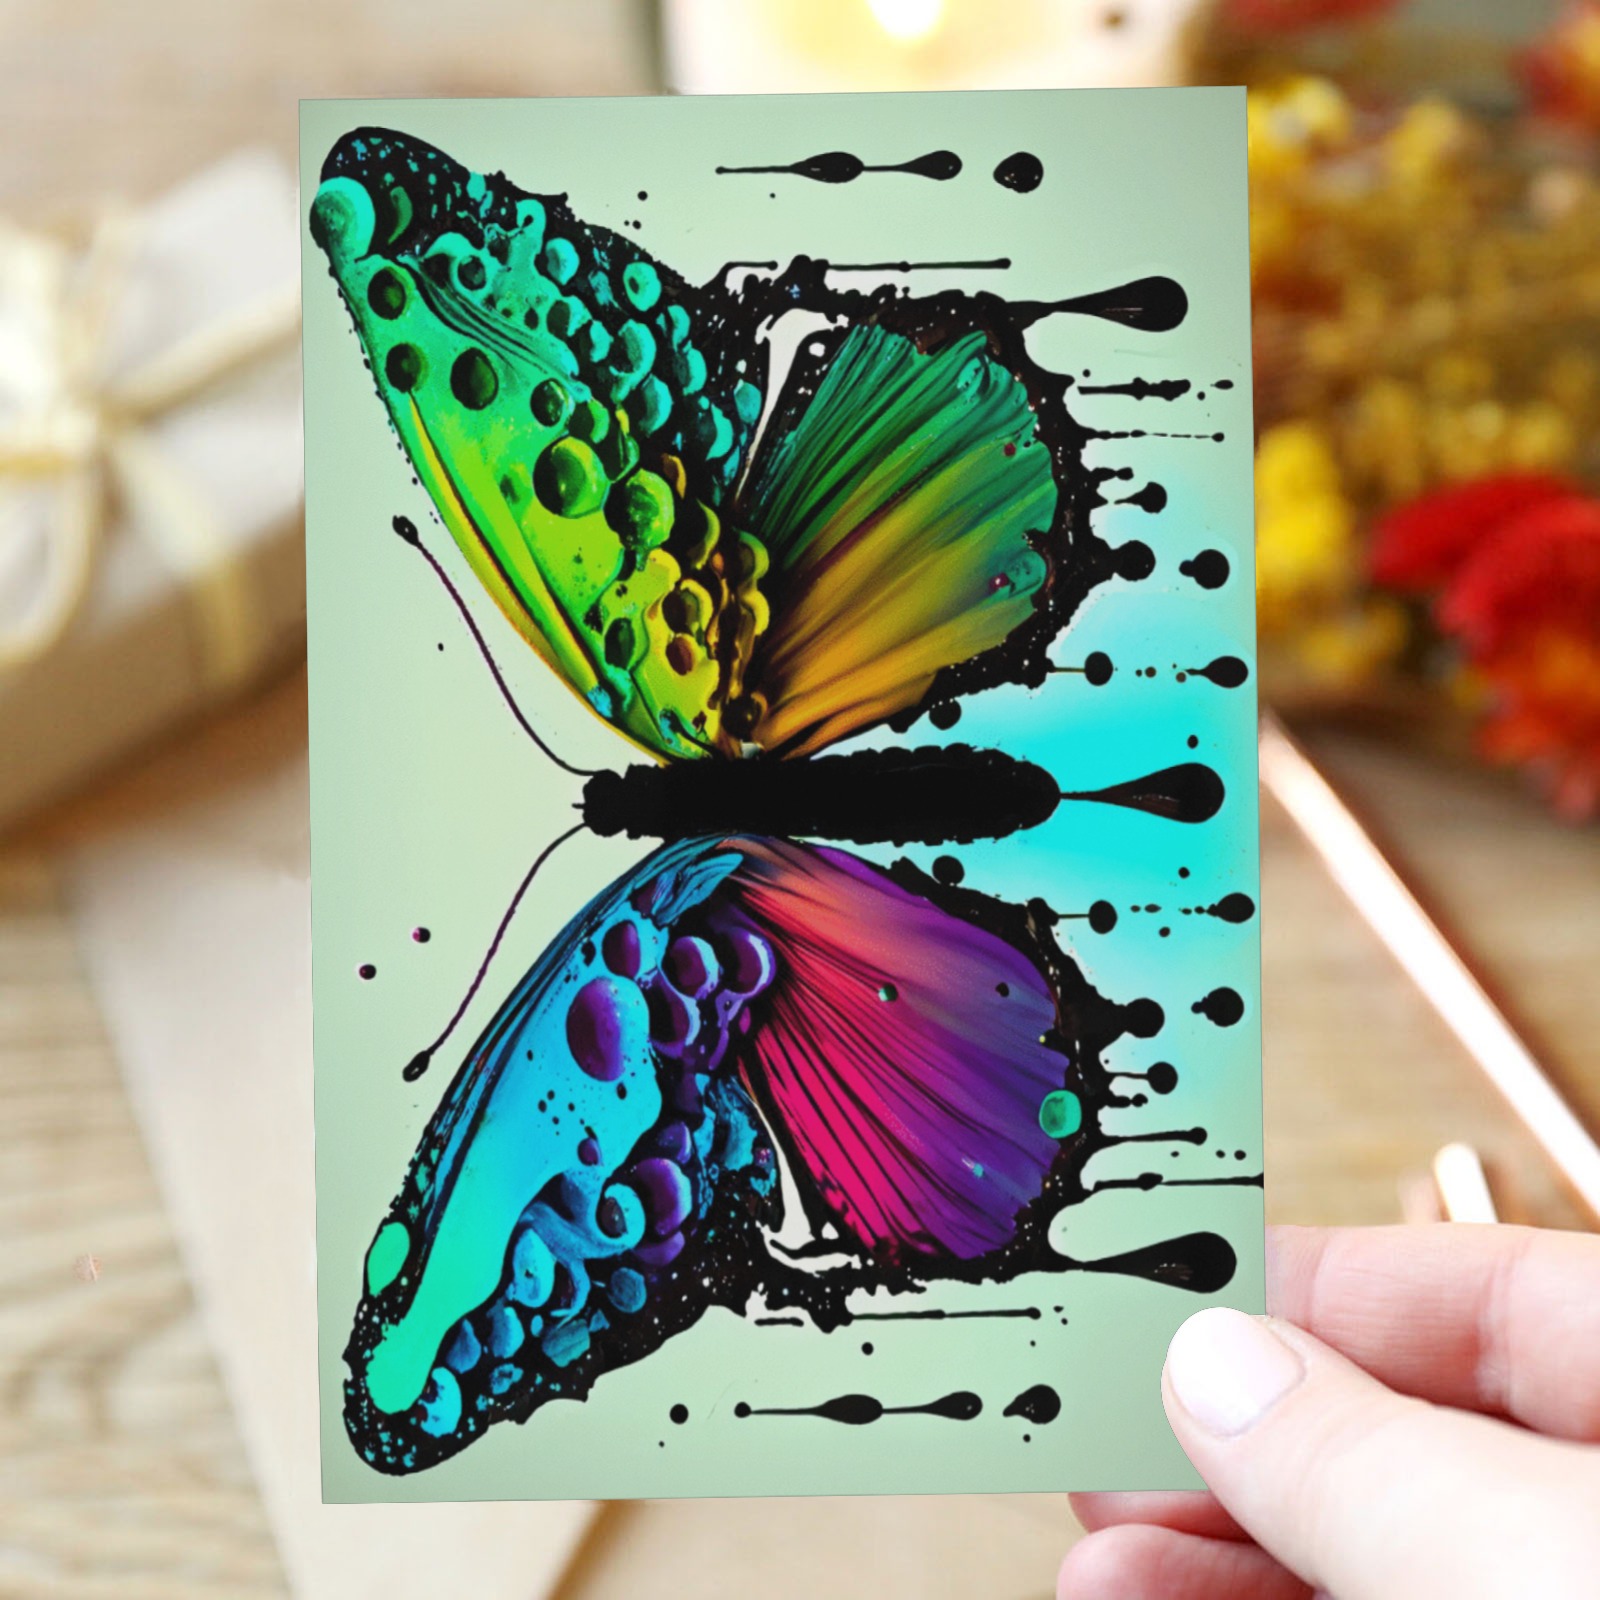 paint droplets the image of a butterfly 1 Greeting Card 4"x6"